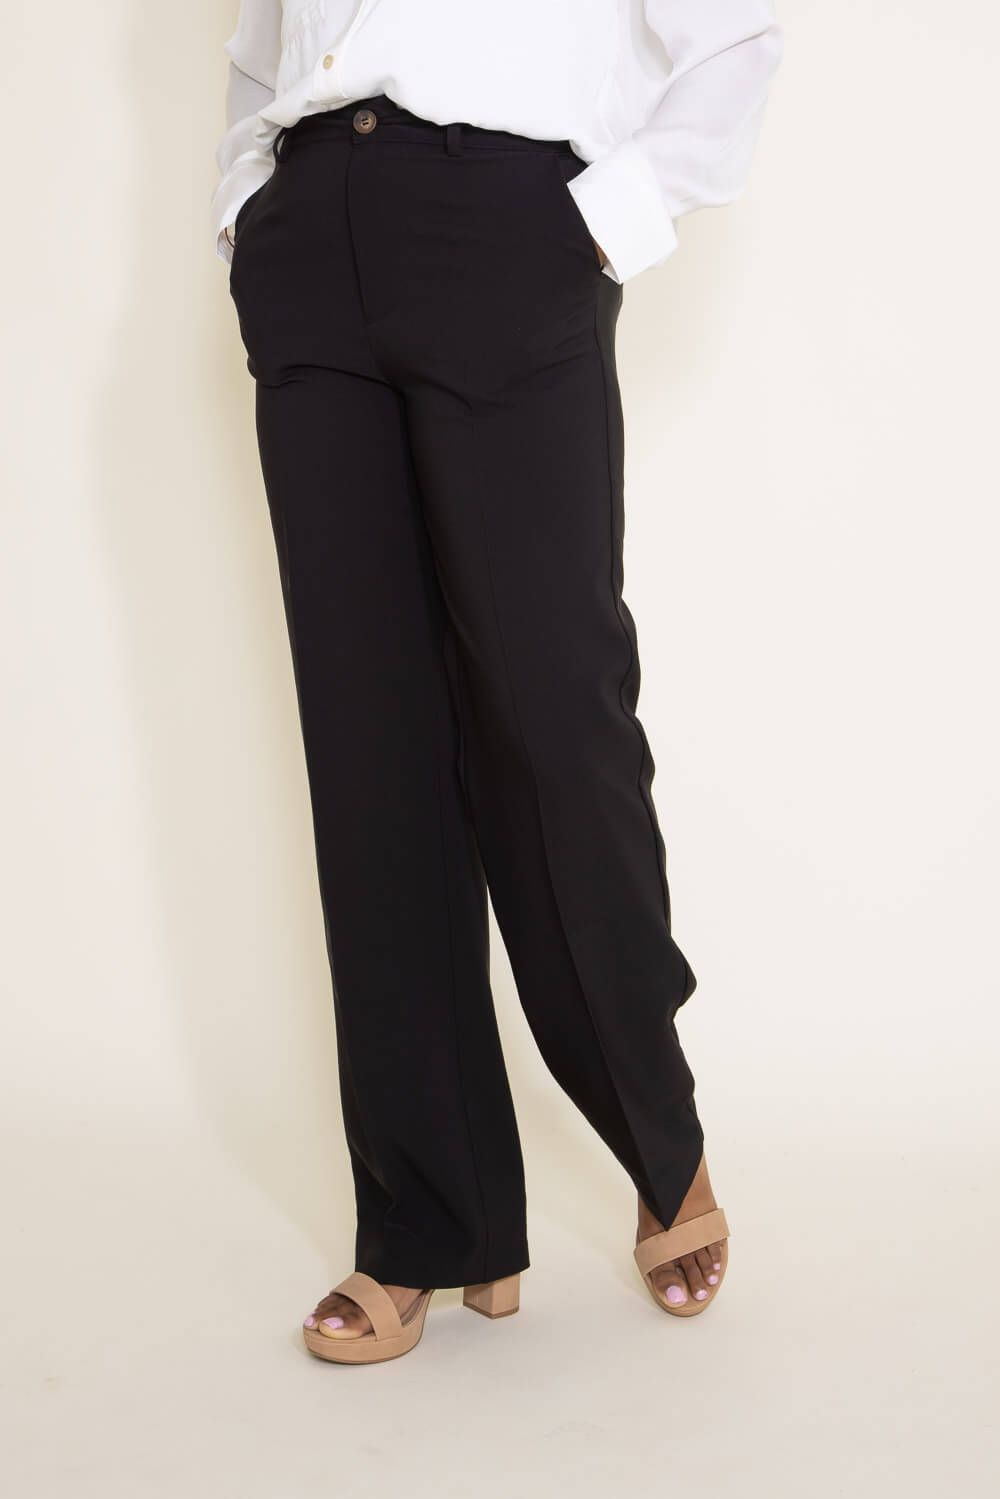 Office Women Trouser Pants Tapered Satin Ankle-length Casual Summer  Workwear New | eBay